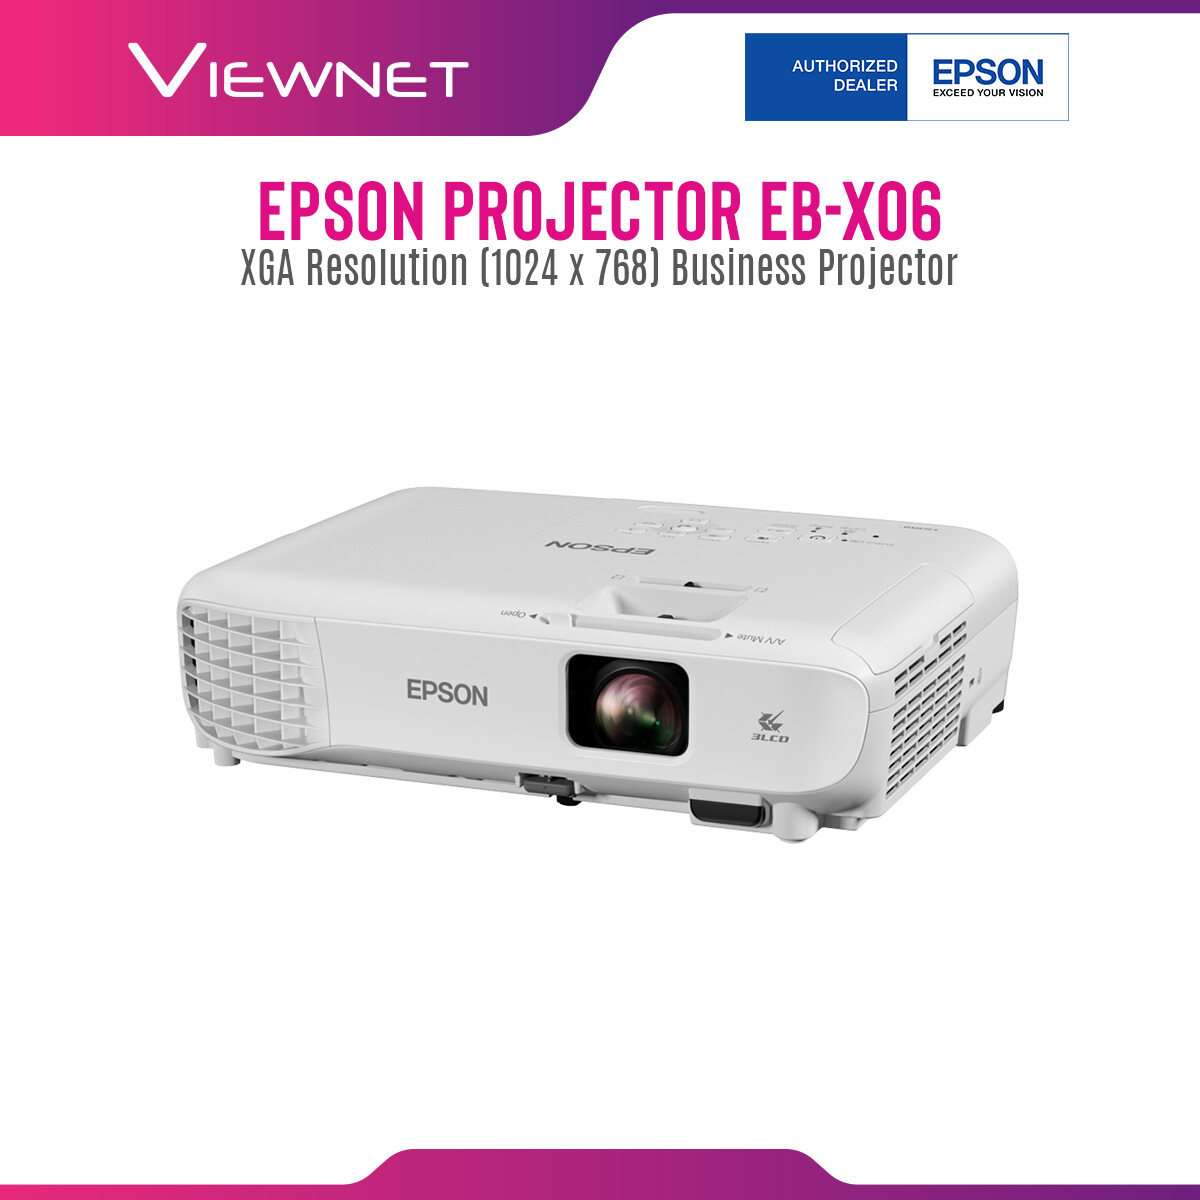 Epson Projector EB-X06 with XGA Resolution (1024 x 768), 3600 Lumens, 12000 Hours Lamp Life in Eco Mode